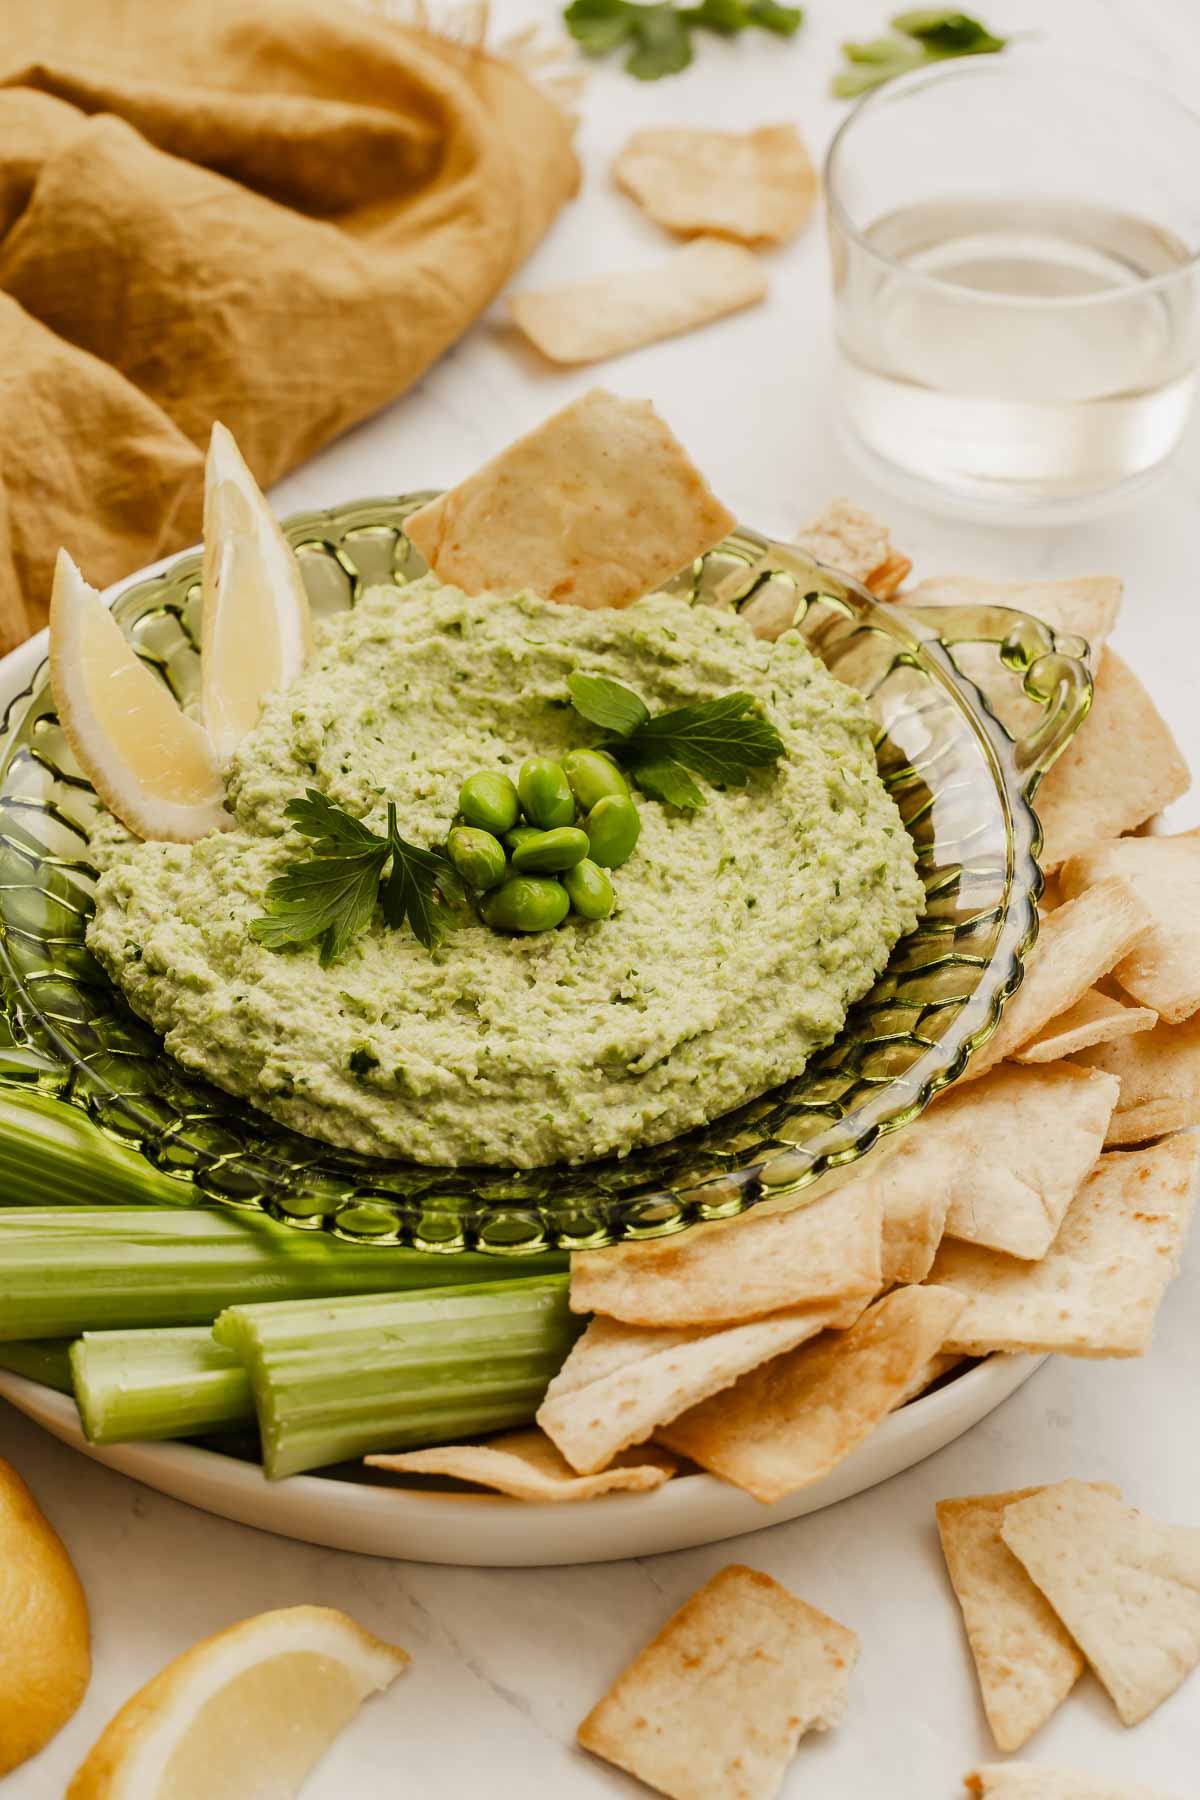 Edamame hummus on plate with pita chips and celery next to it.